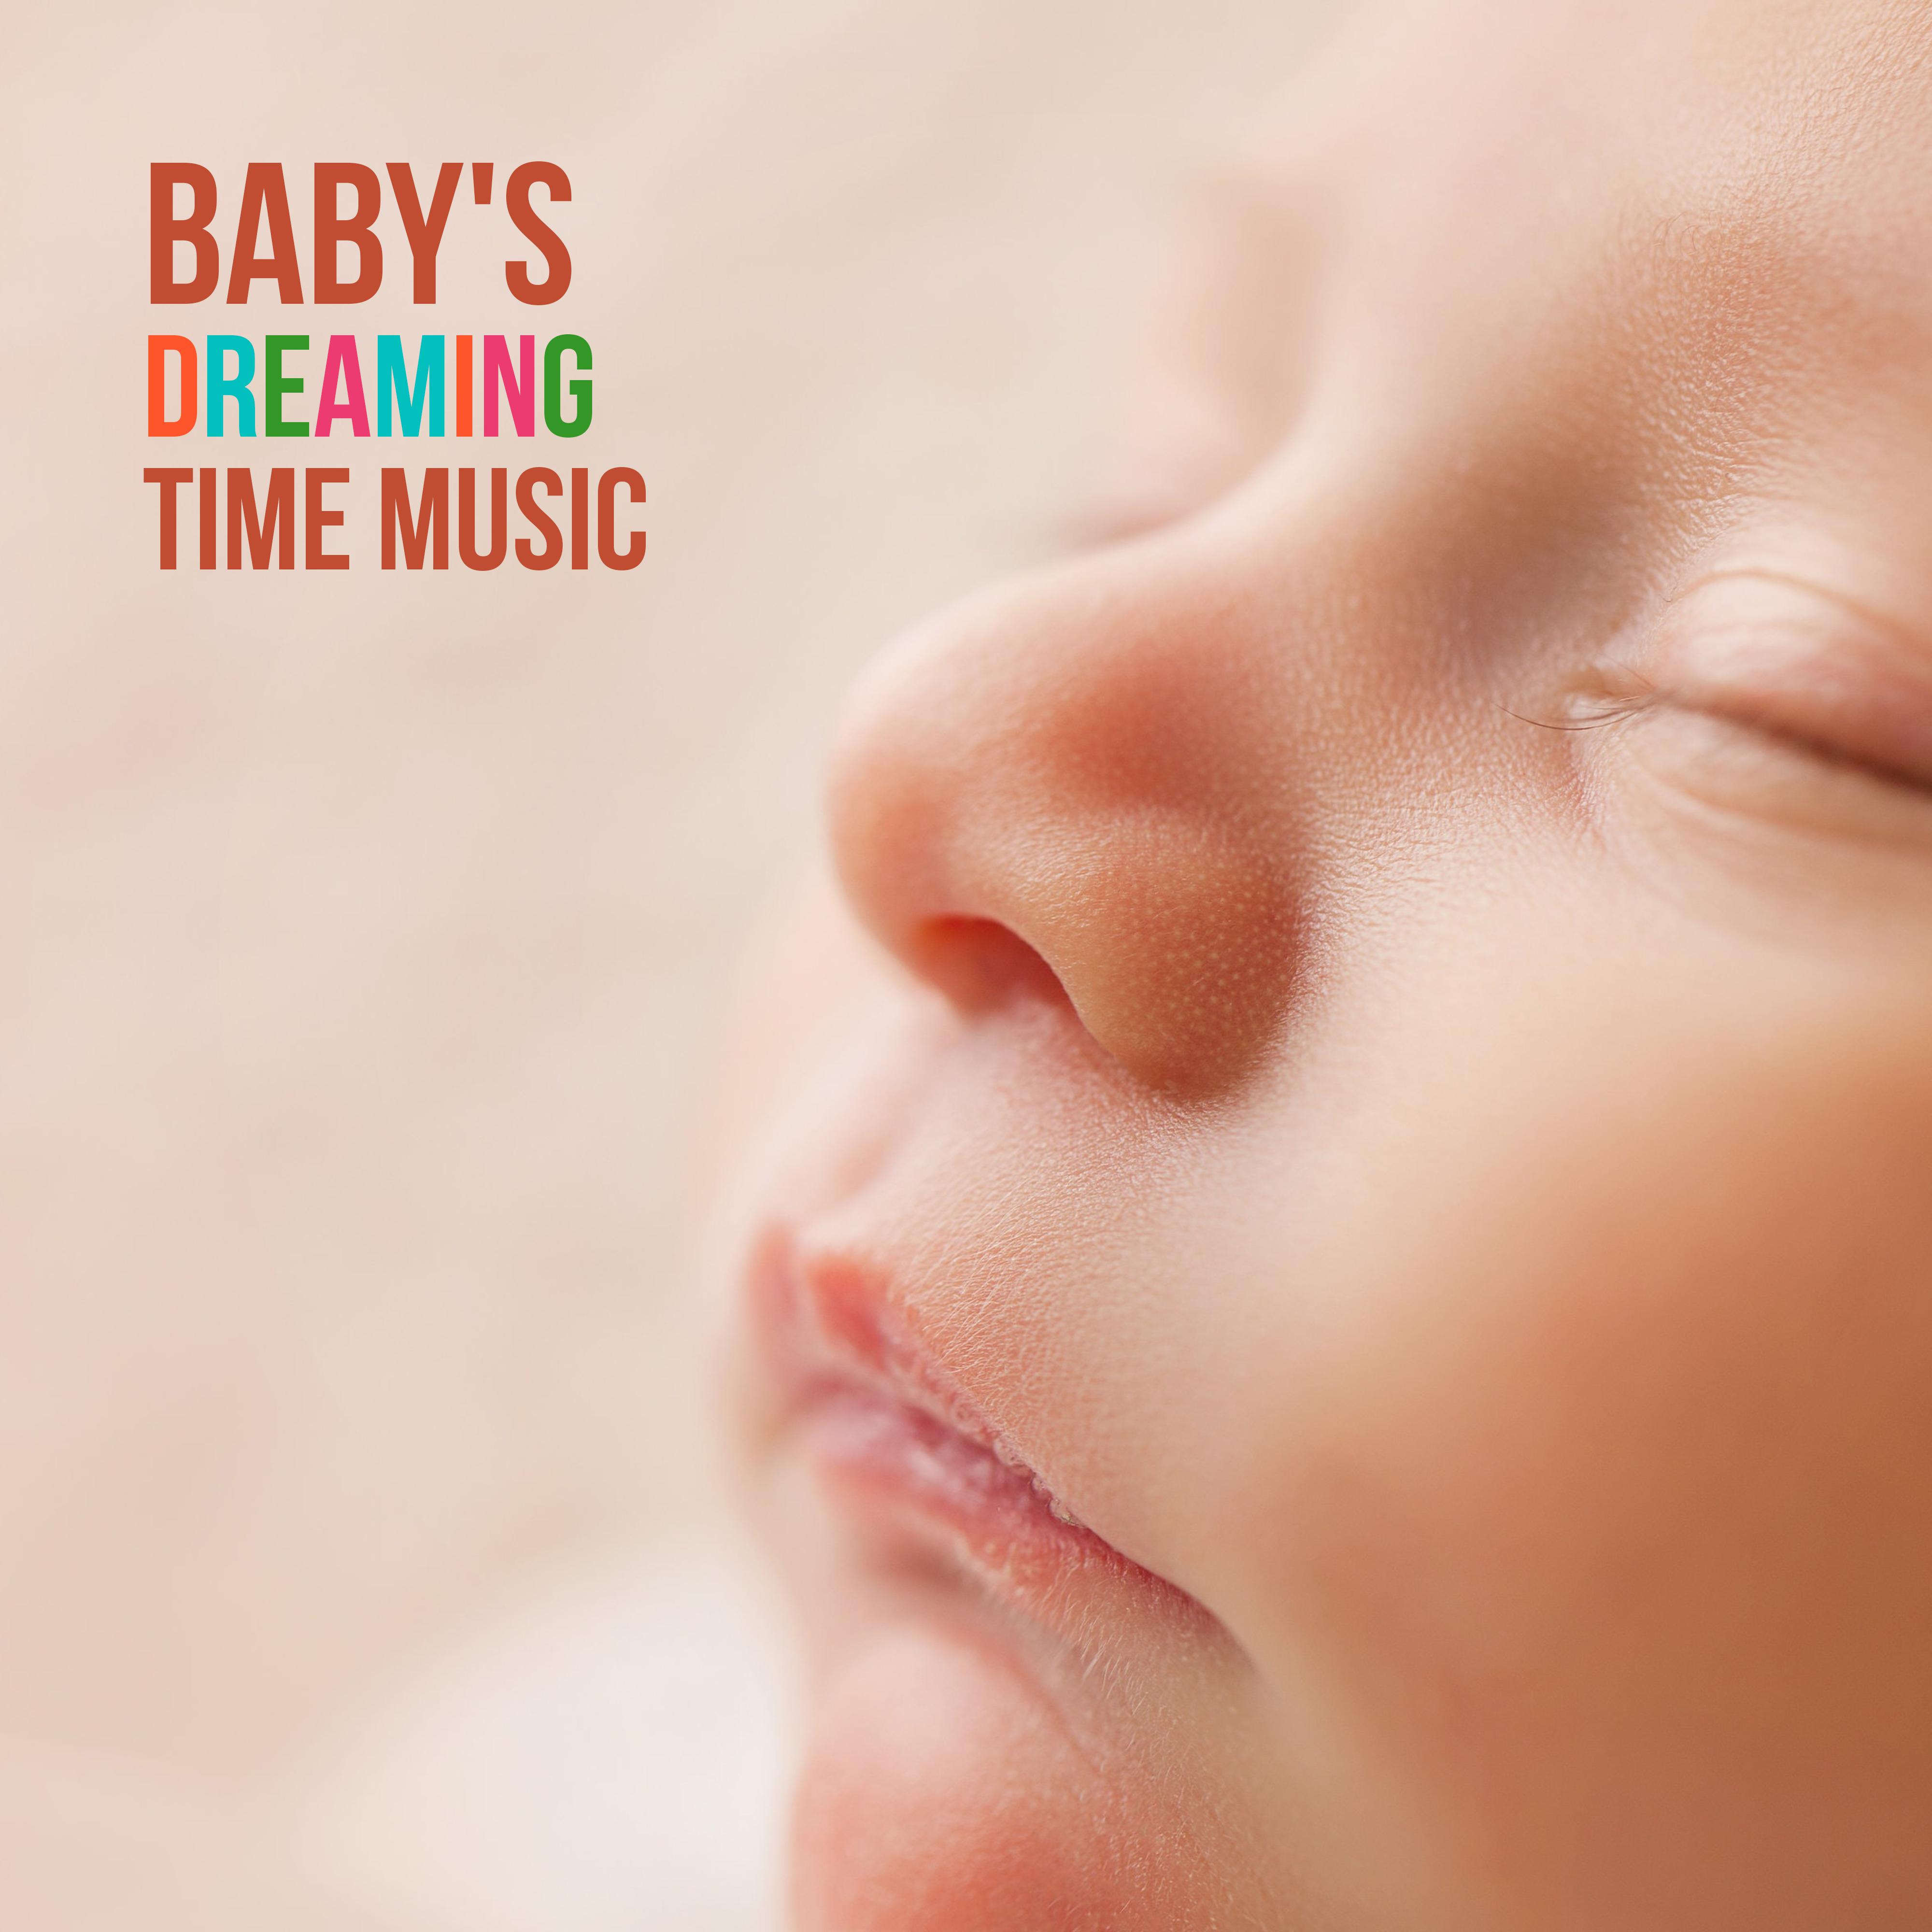 Baby' s Dreaming Time Music  Soothing Sounds of New Age Fresh 2019 Music, Calming Down, Cure Insomnia, Perfect Sleep